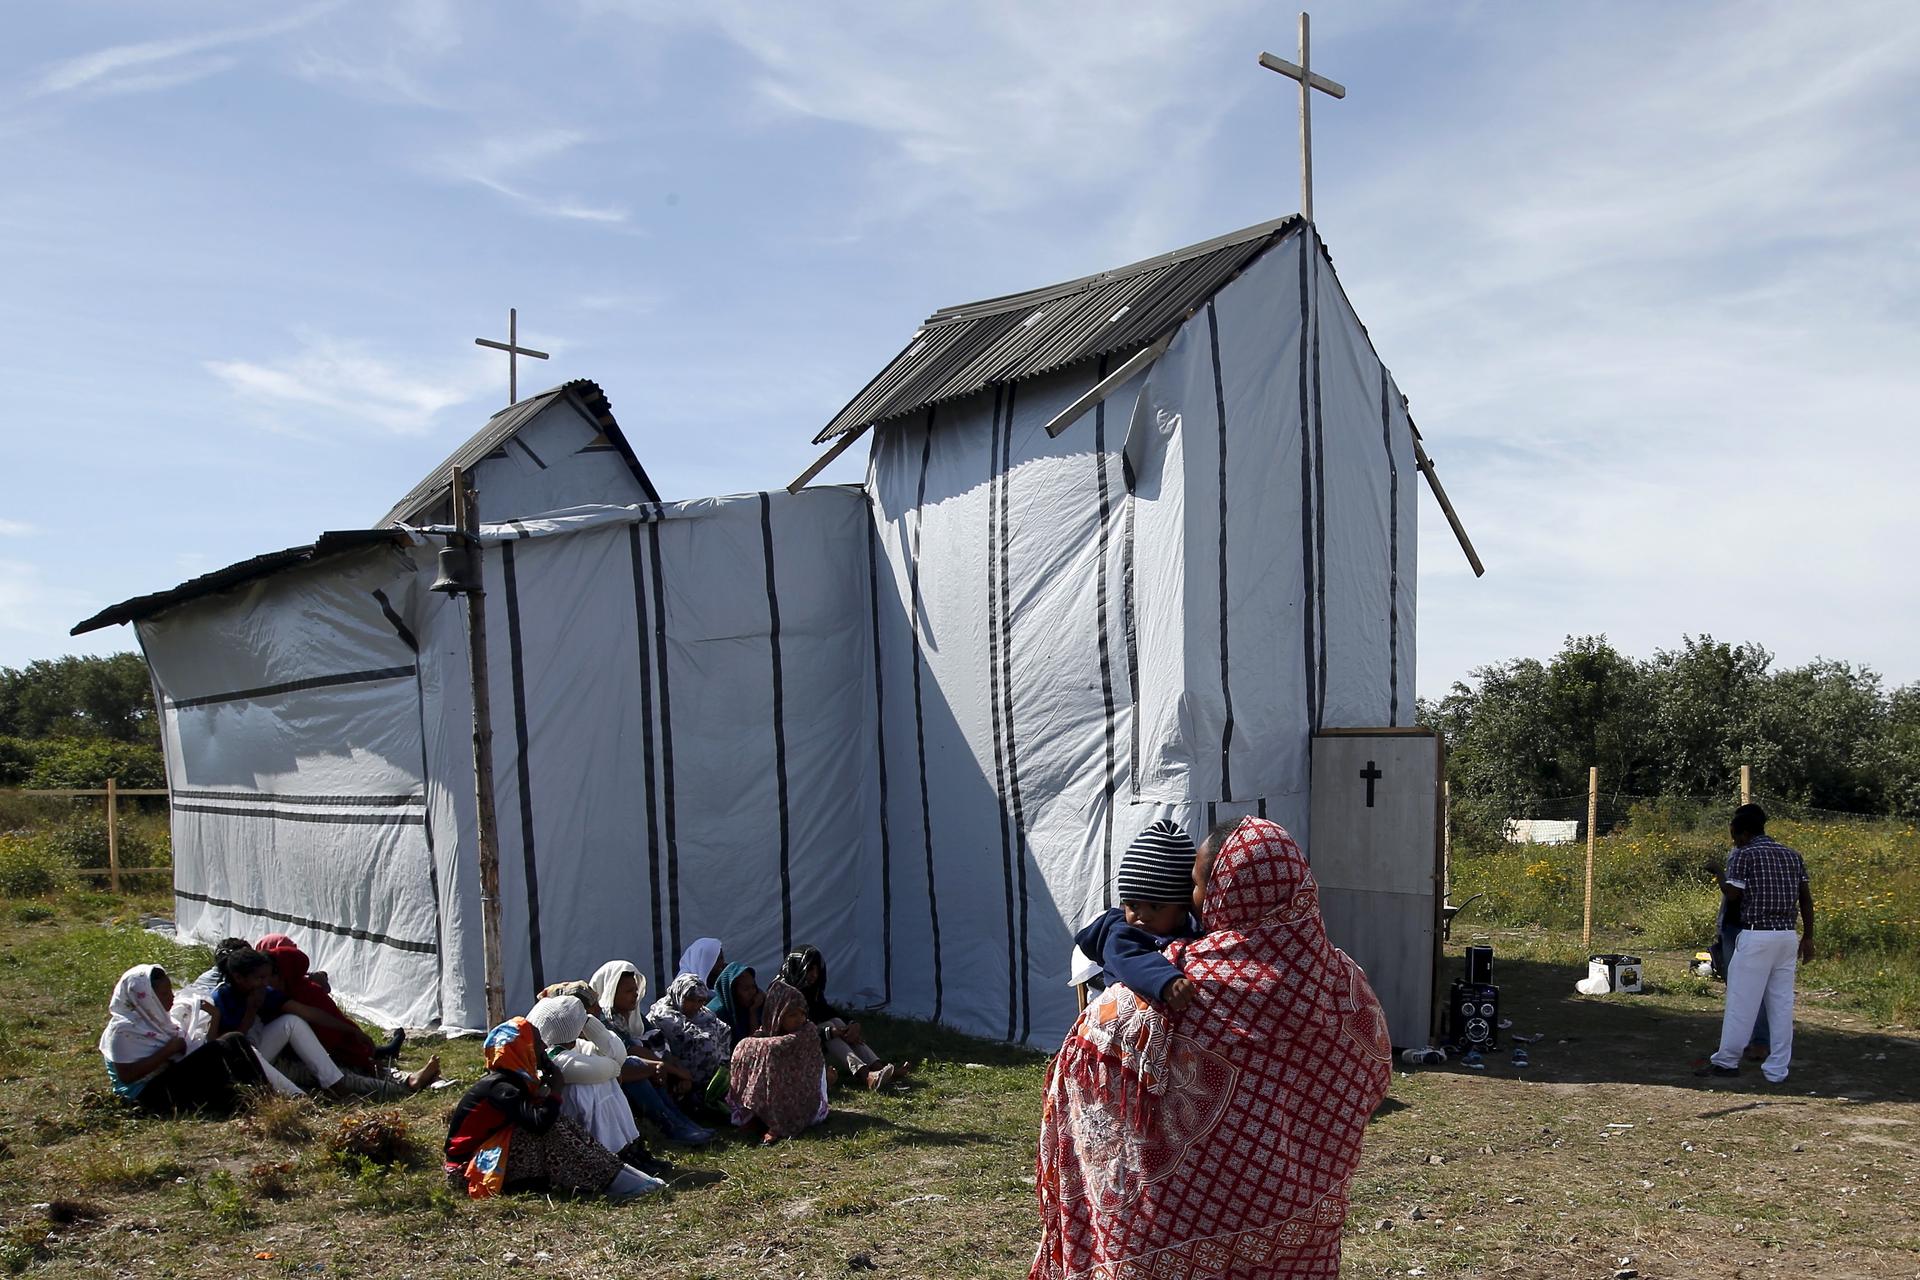 Christian women from Ethiopia and Eritrea sing during the Sunday mass at the church in the migrants' camp near Calais, France